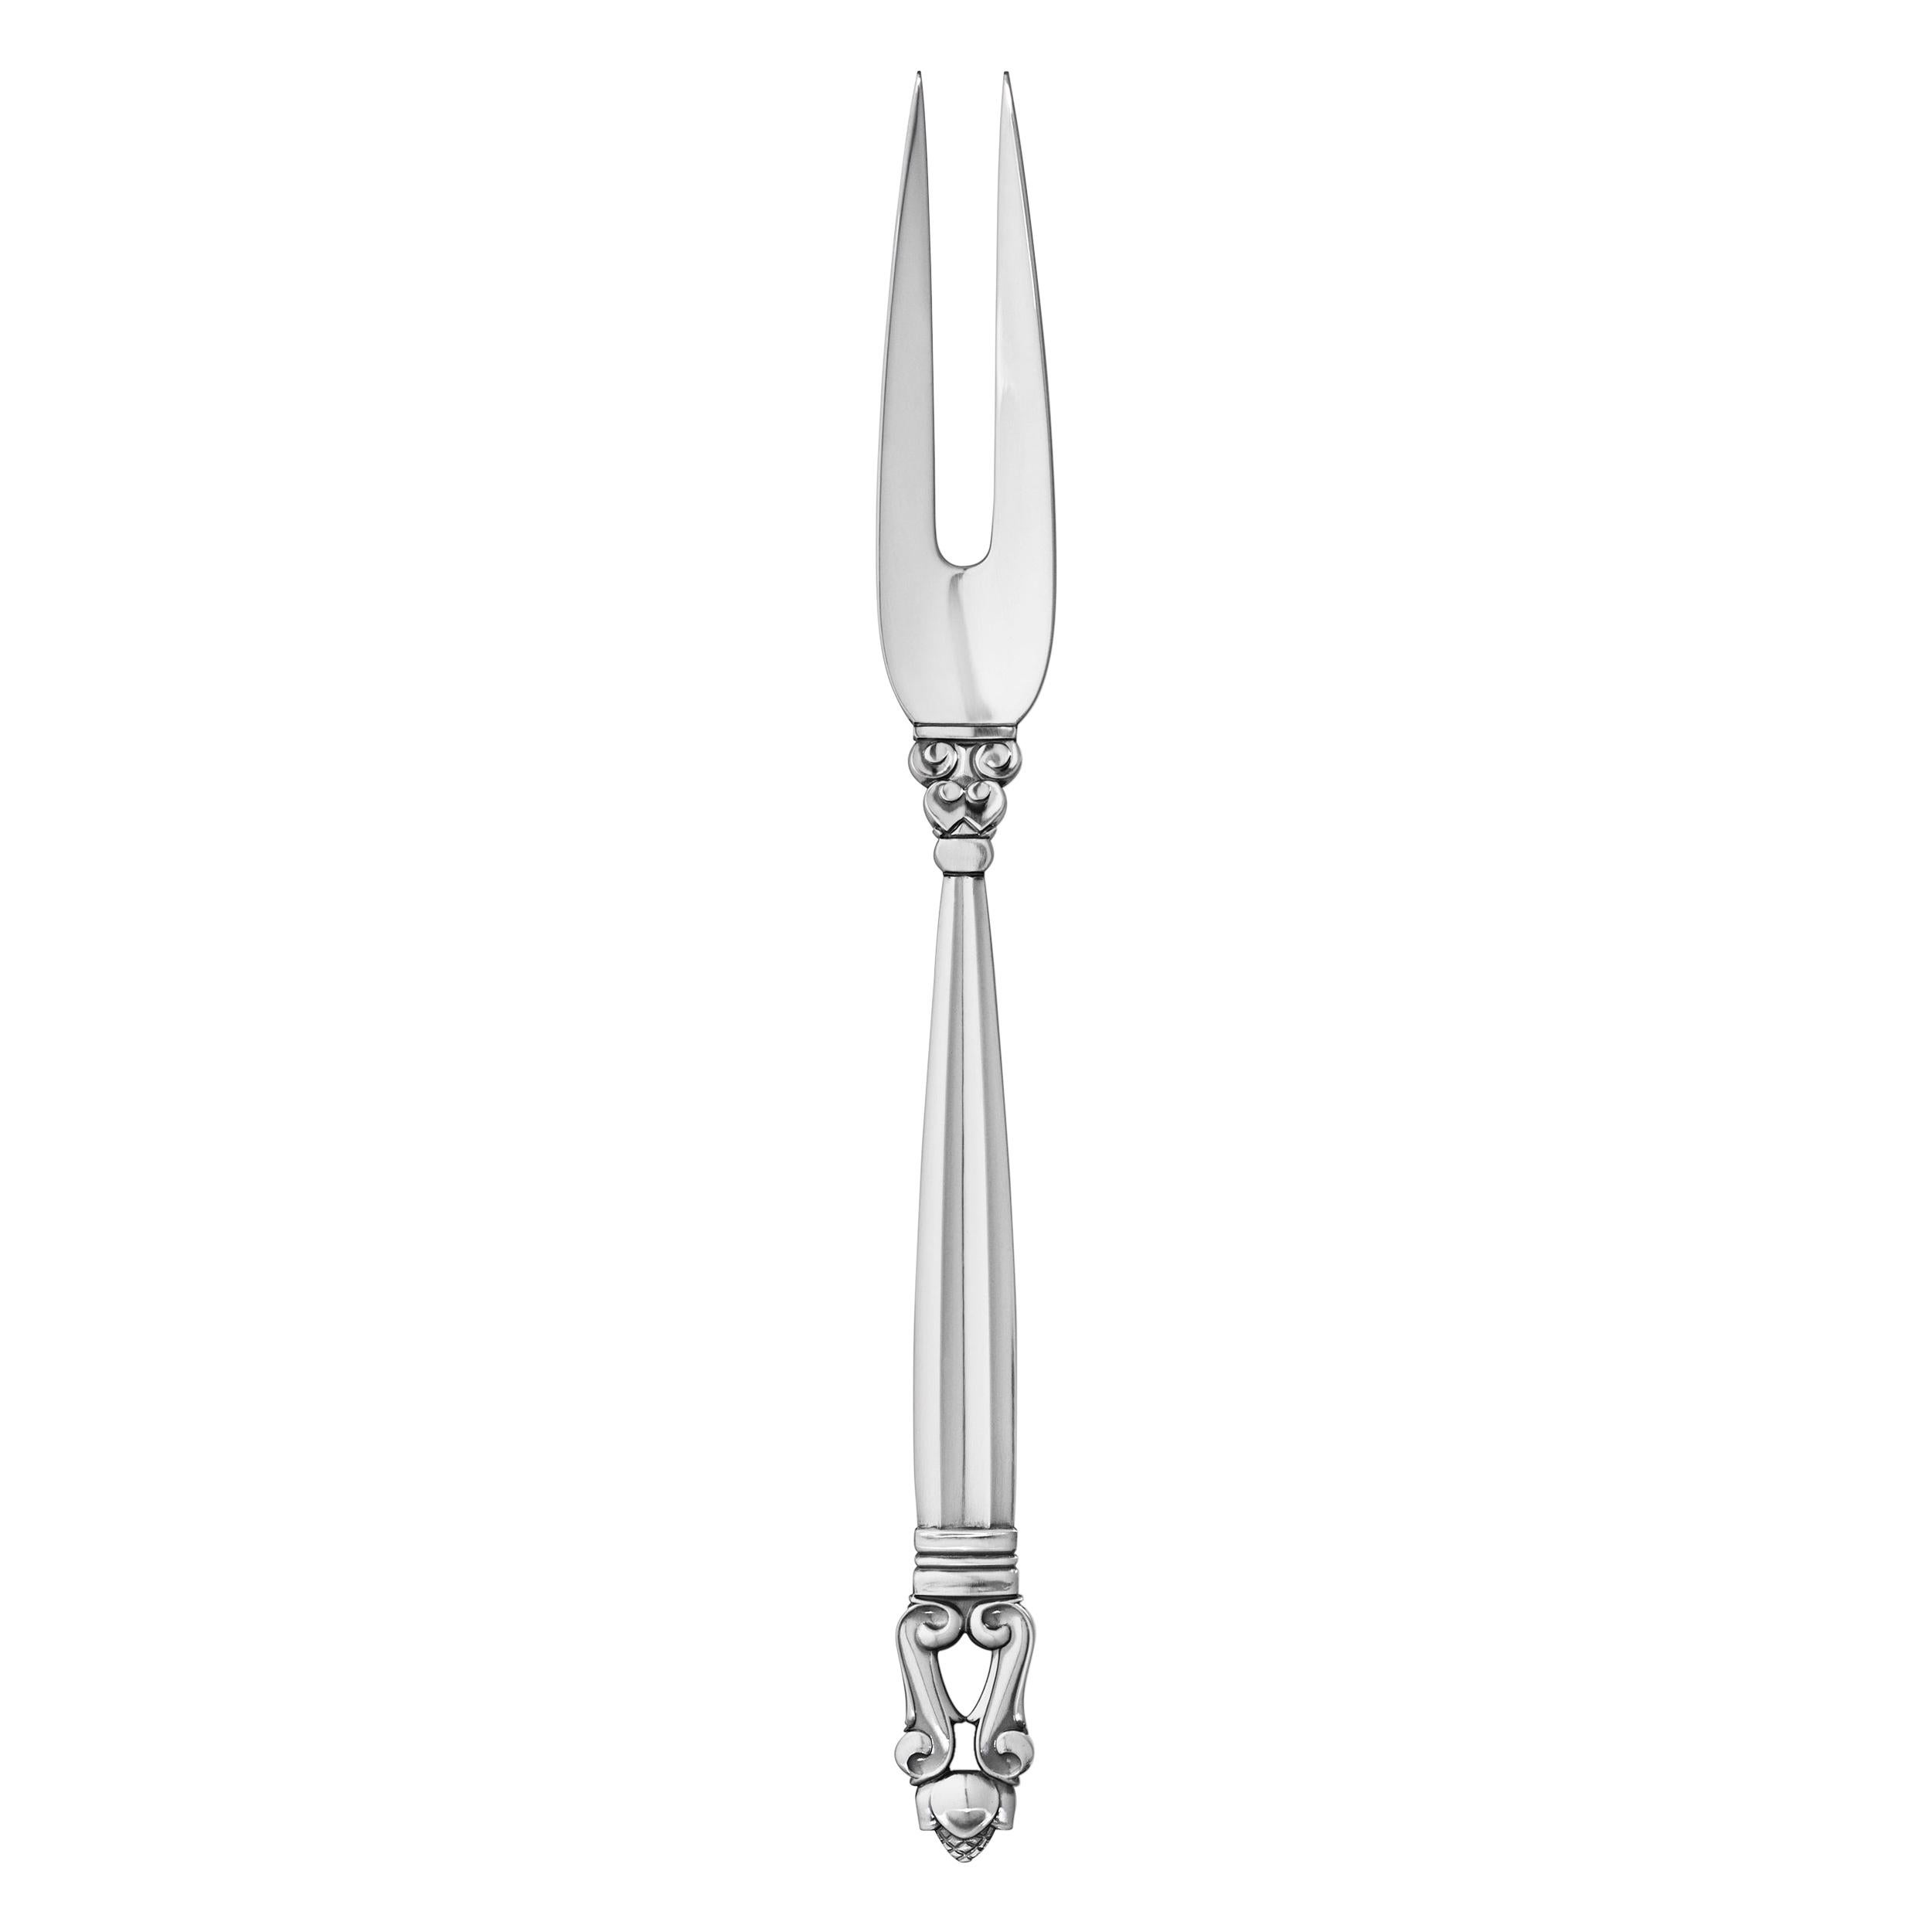 Georg Jensen Sterling Silver Acorn Meat Fork with 2 Tines by Johan Rohde